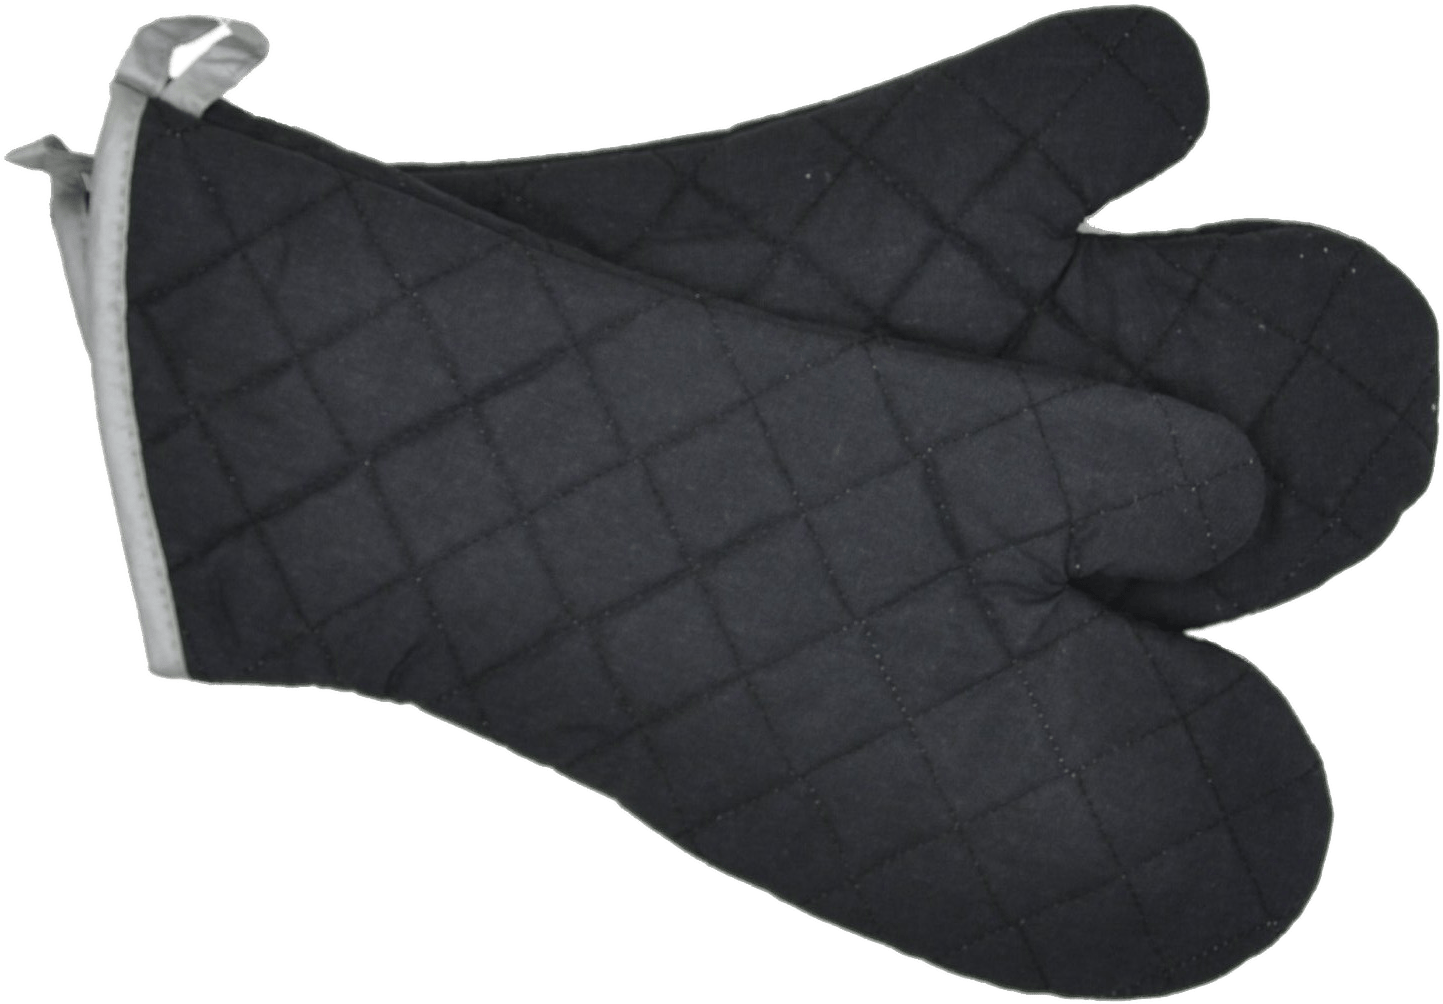 Black Oven Mitts - Oven Mitt No Background, Hd Png Download